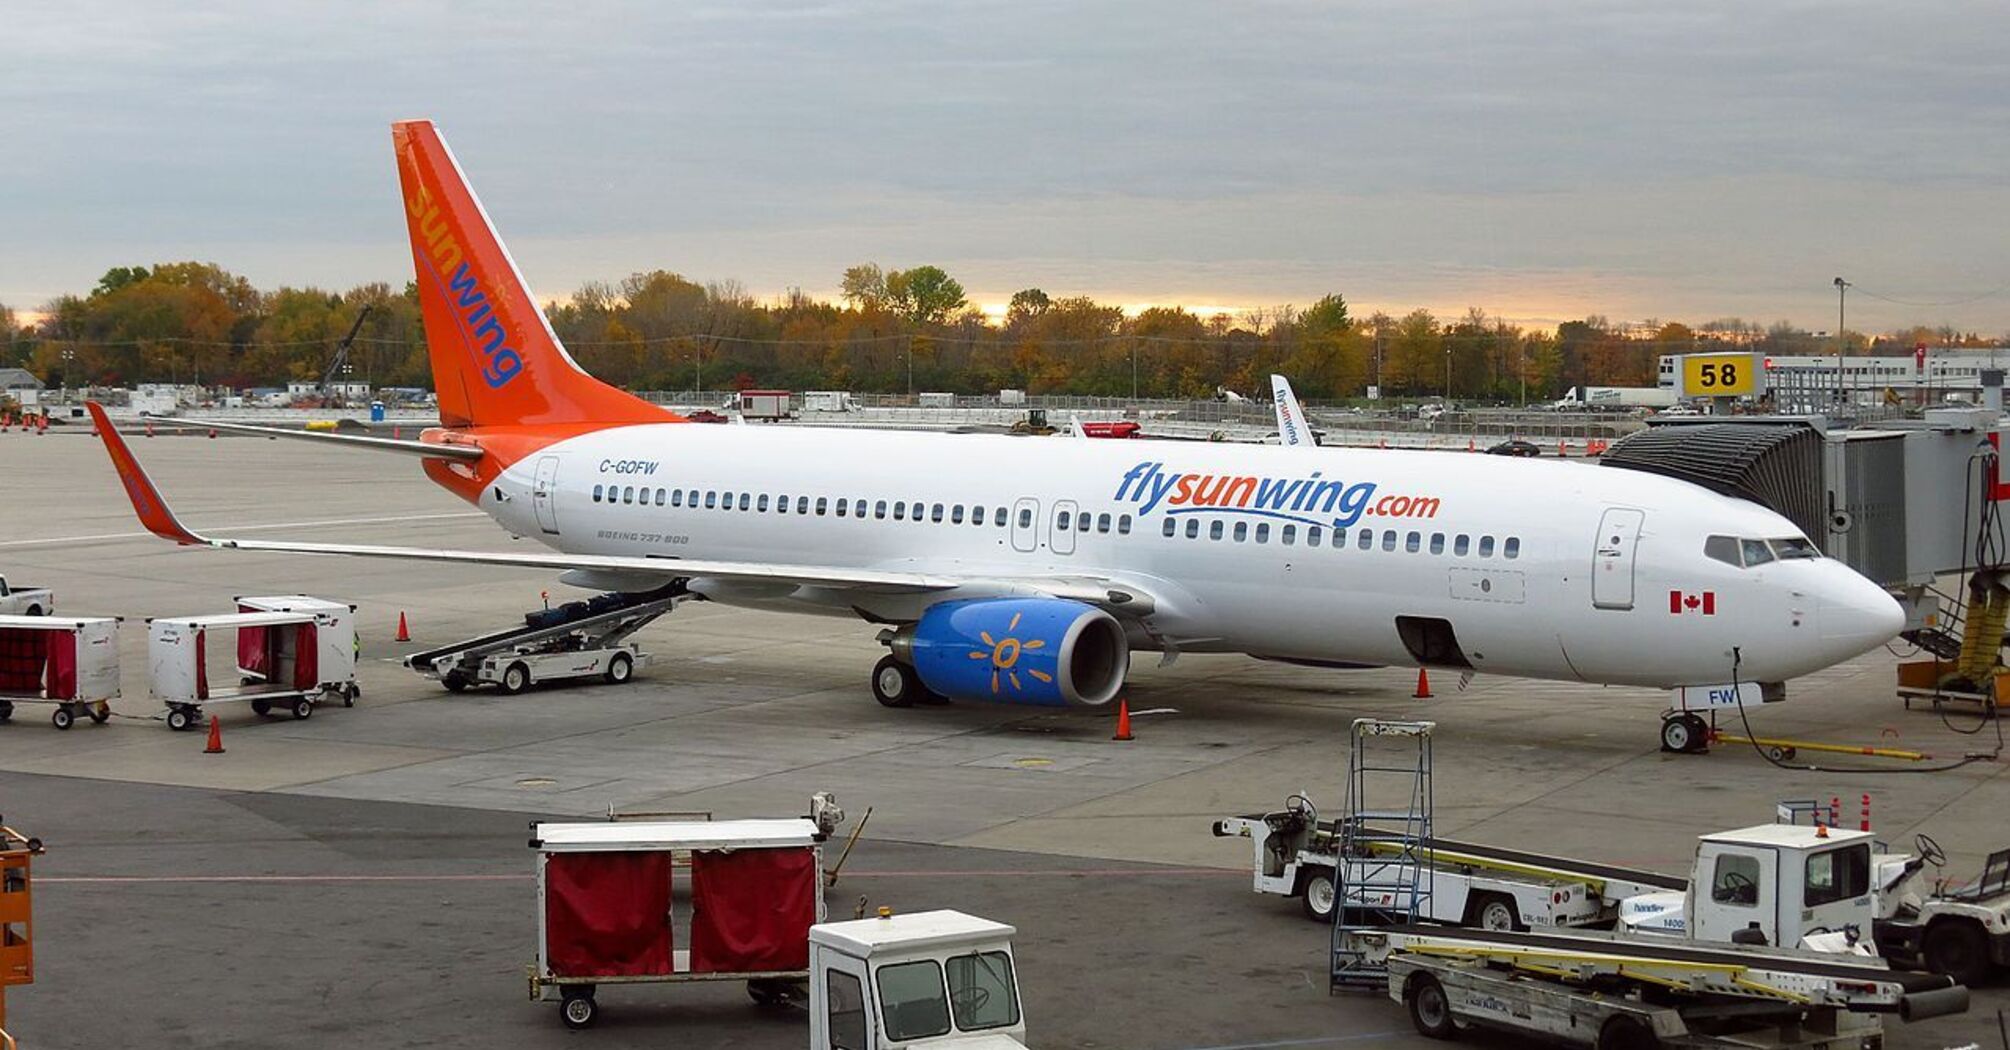 Sunwing Airlines Compensation for Delayed or Cancelled Flights